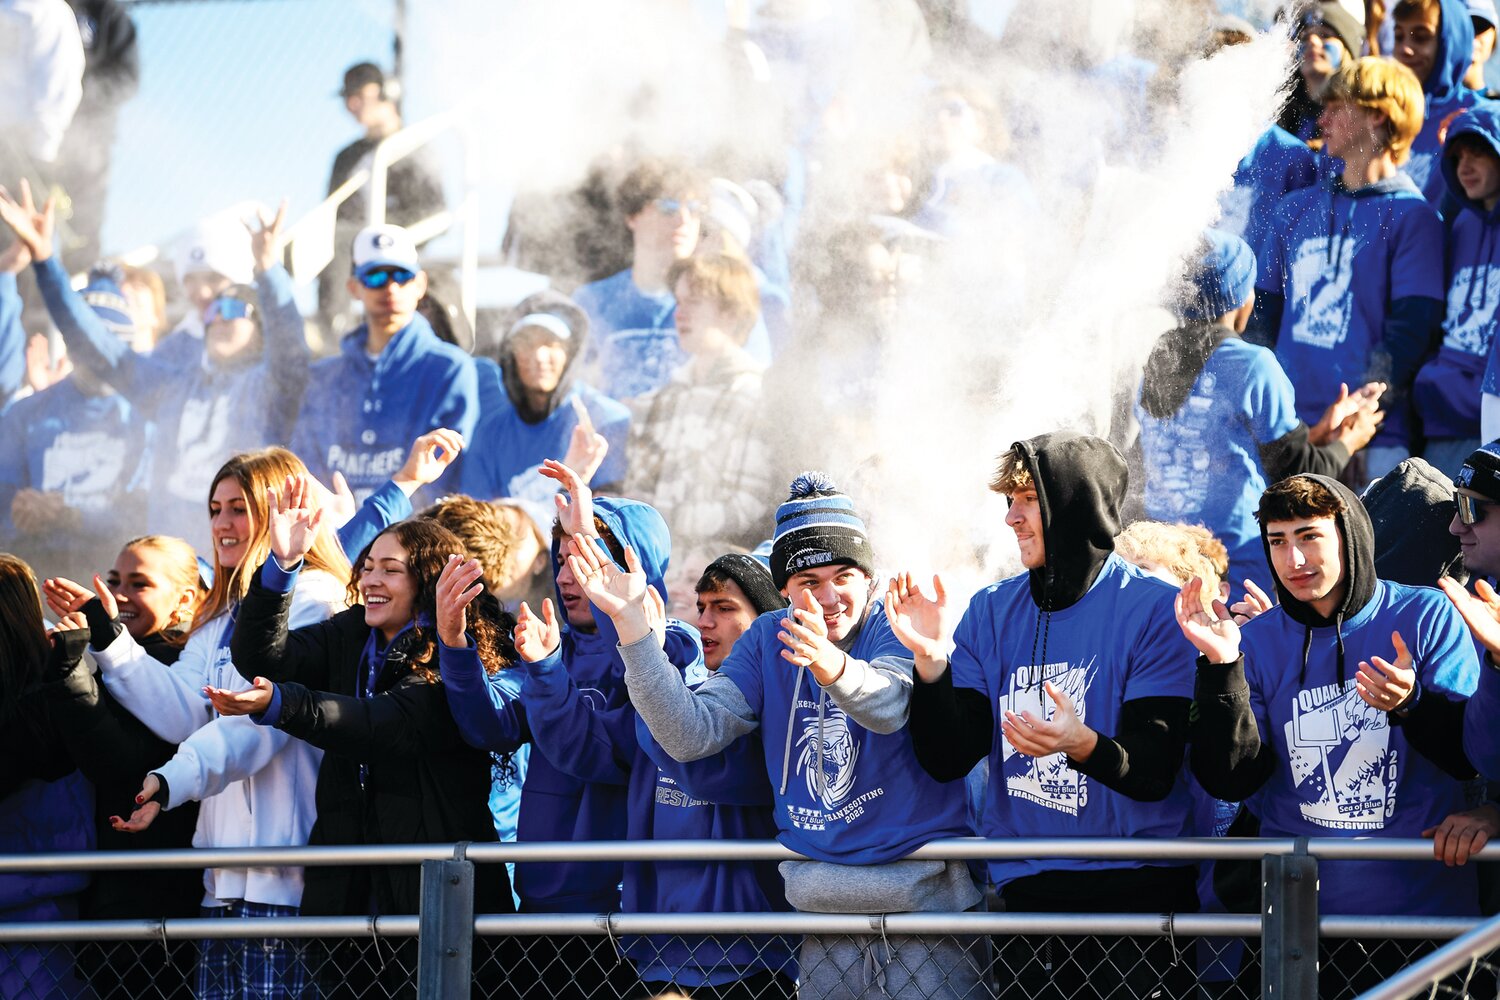 The Quakertown student section sprays baby powder after a 40-yard field goal by Quakertown kicker Logan Jeffery.